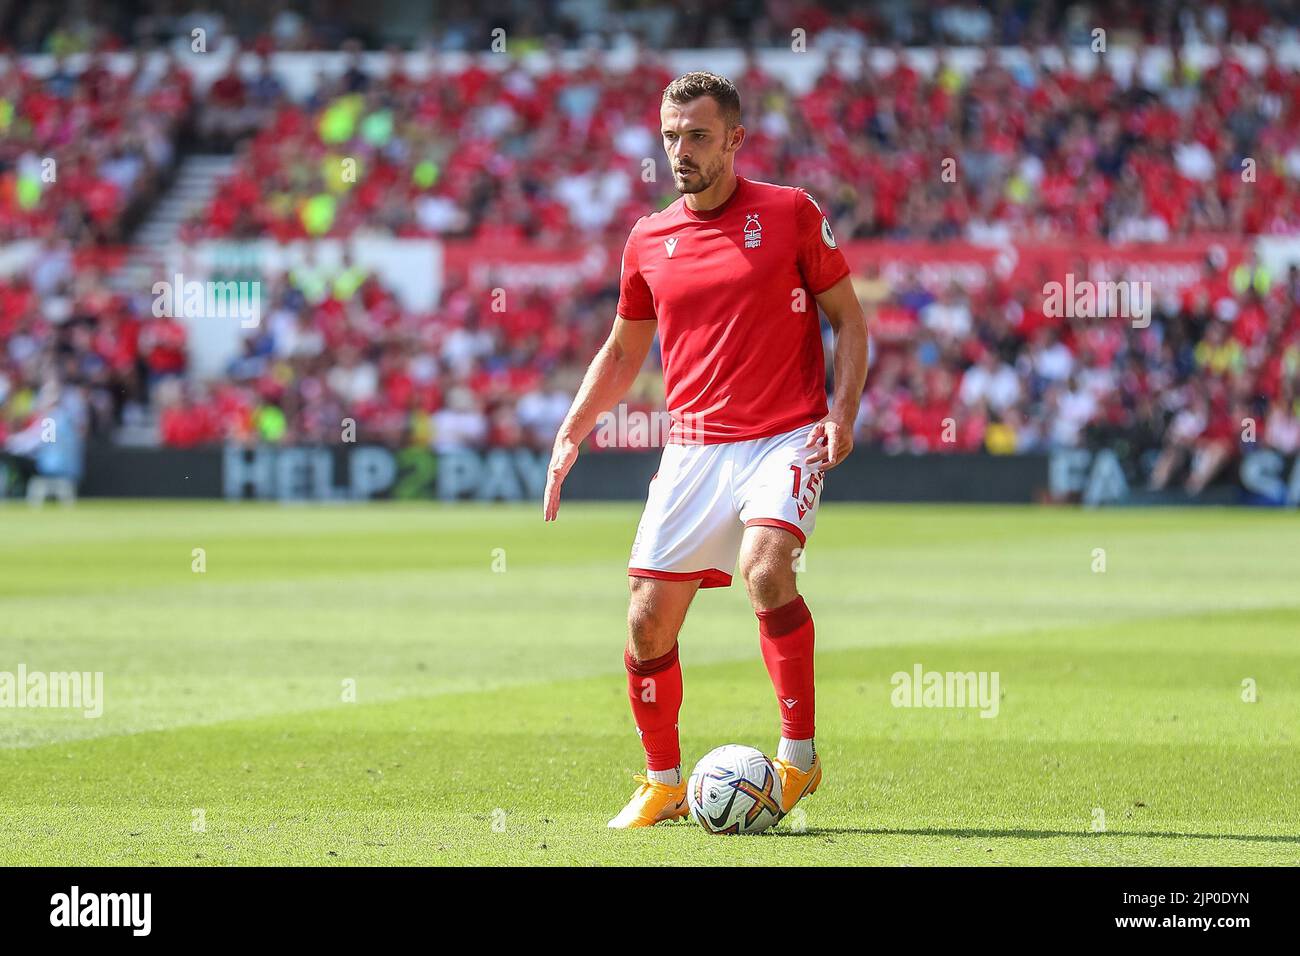 Harry Toffolo #15 of Nottingham Forest controls the ball Stock Photo